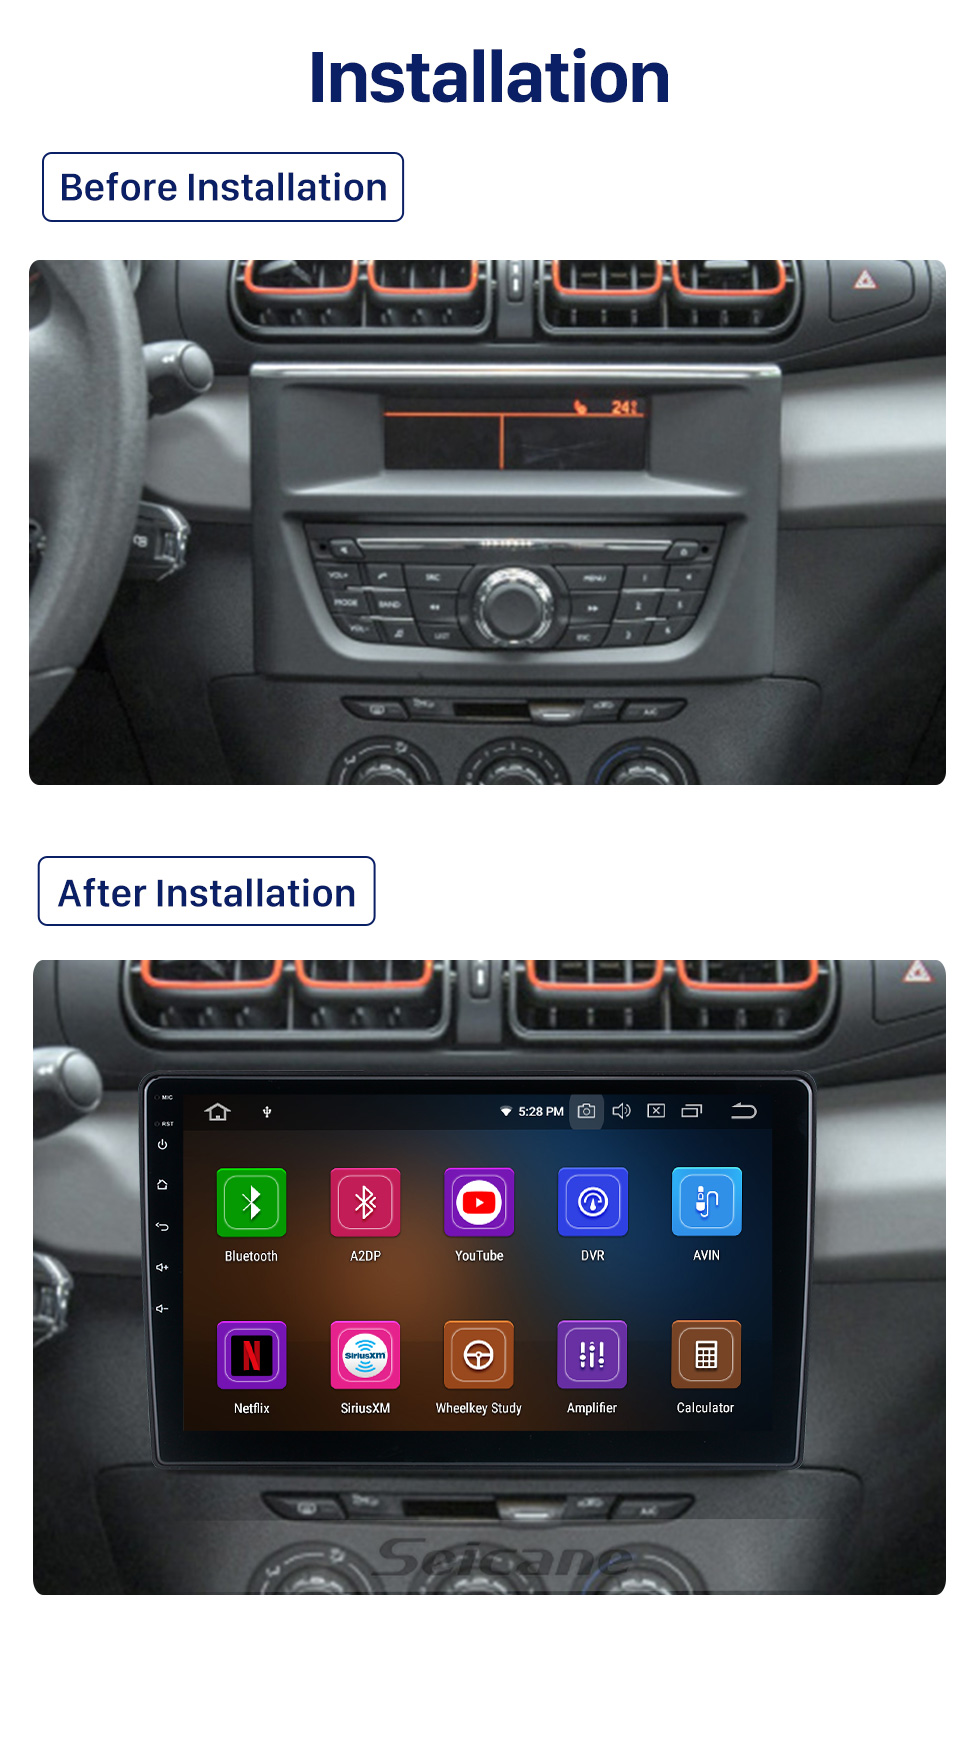 10.1 Inch HD Touchscreen for CITROEN C3-XR GPS Navi Car Radio Stereo Player Support 1080P Video Player